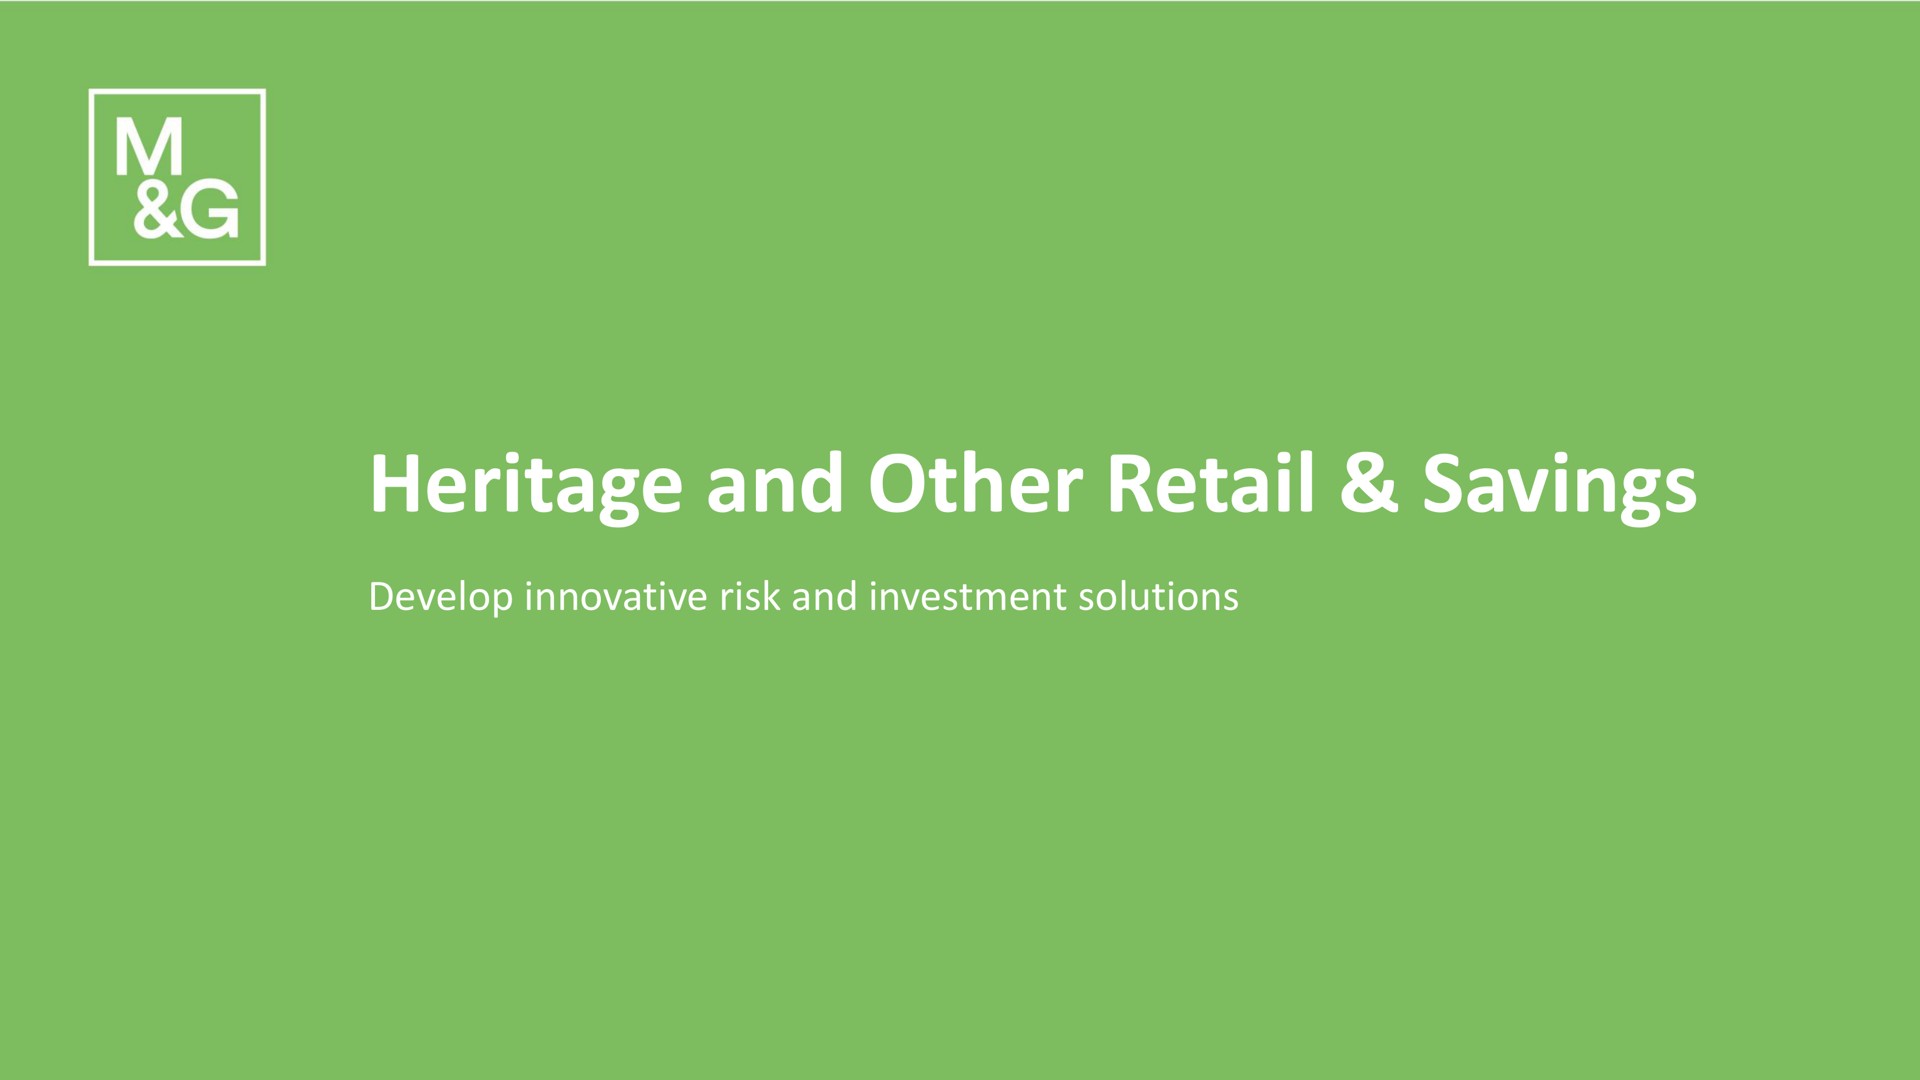 heritage and other retail savings | M&G